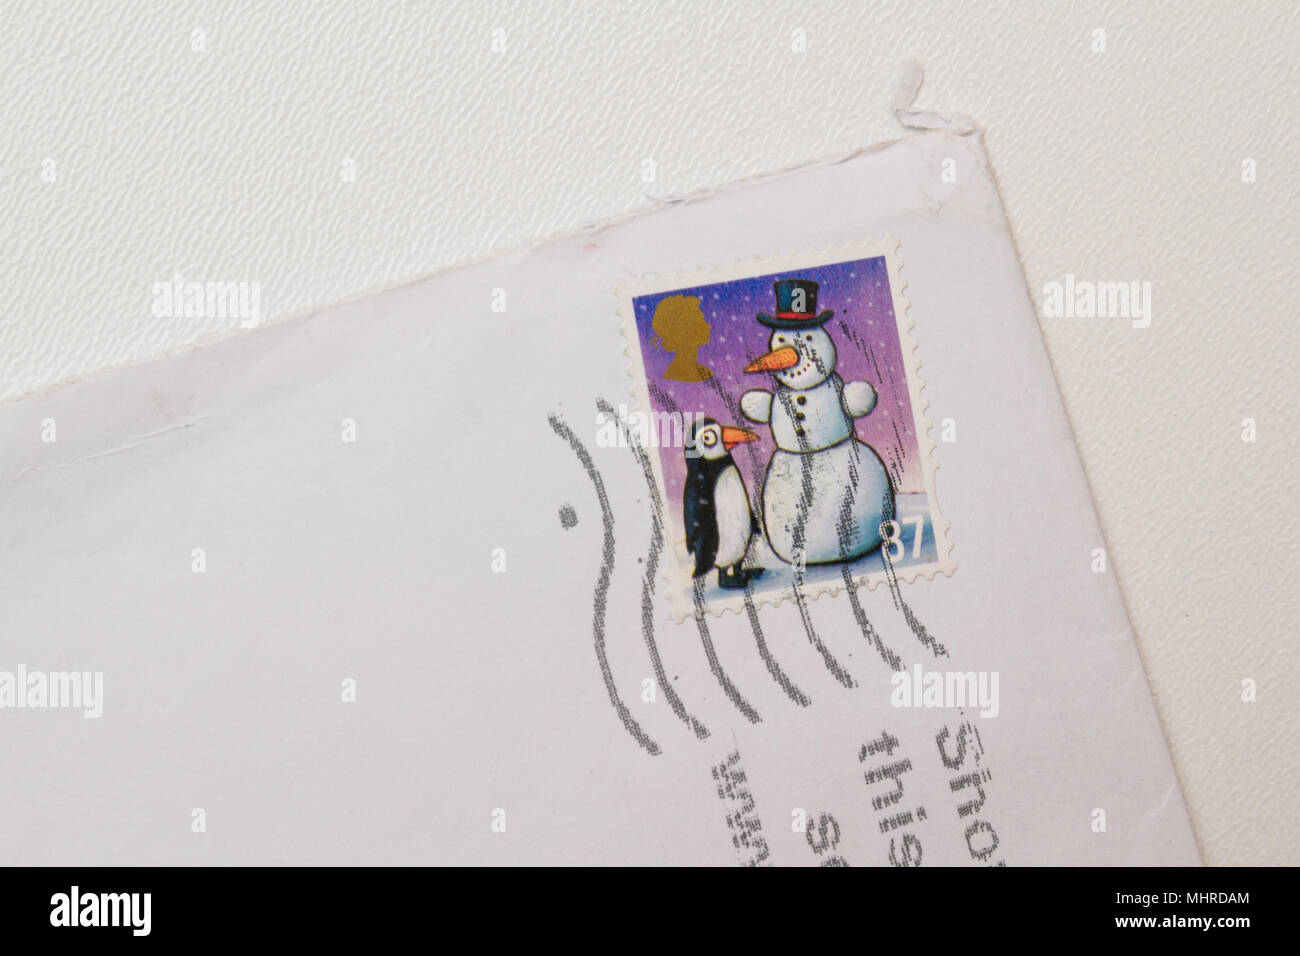 Colorful Christmas stamp. Snowman and penguin stamp close-up. Corner of white british envelope isolated on white background. Winter illustration stamp Stock Photo